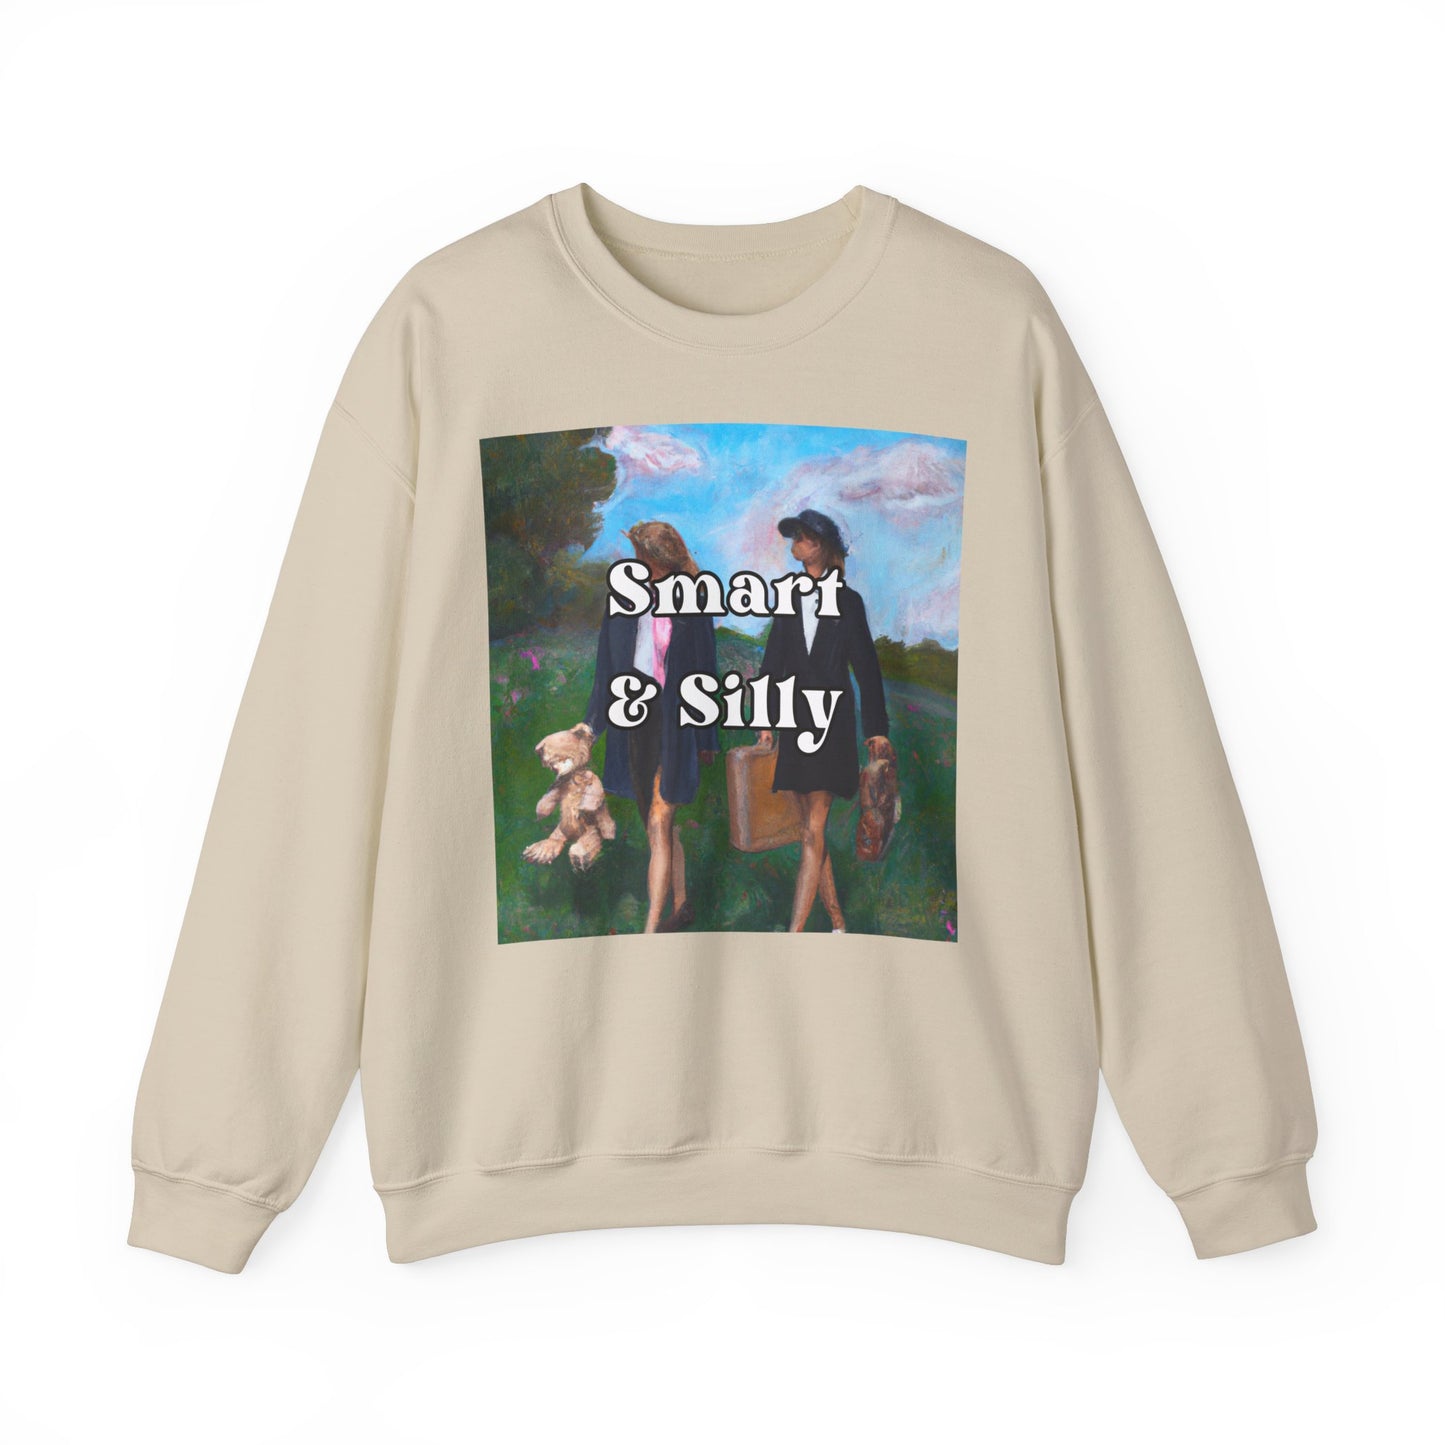 Smart and Silly - sweatshirt x Sarah Words Collection